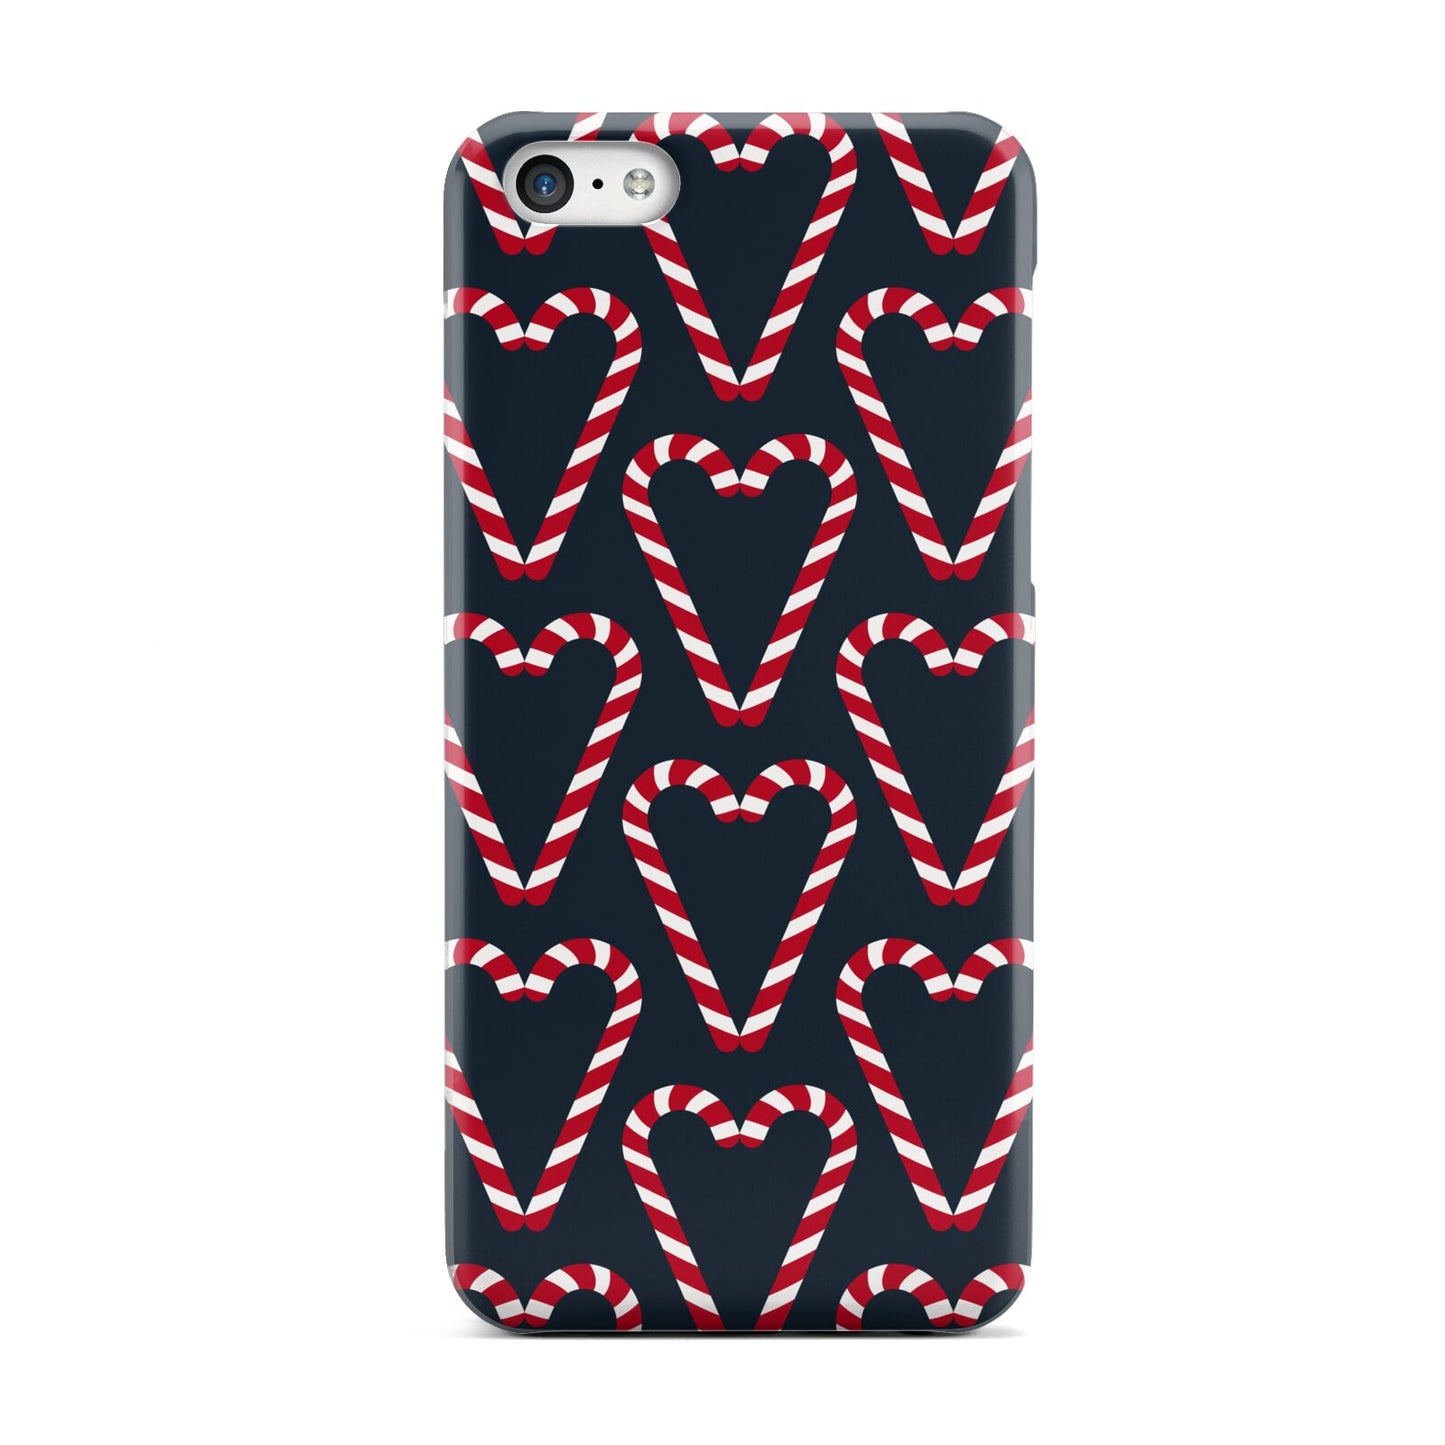 Candy Cane Pattern Apple iPhone 5c Case